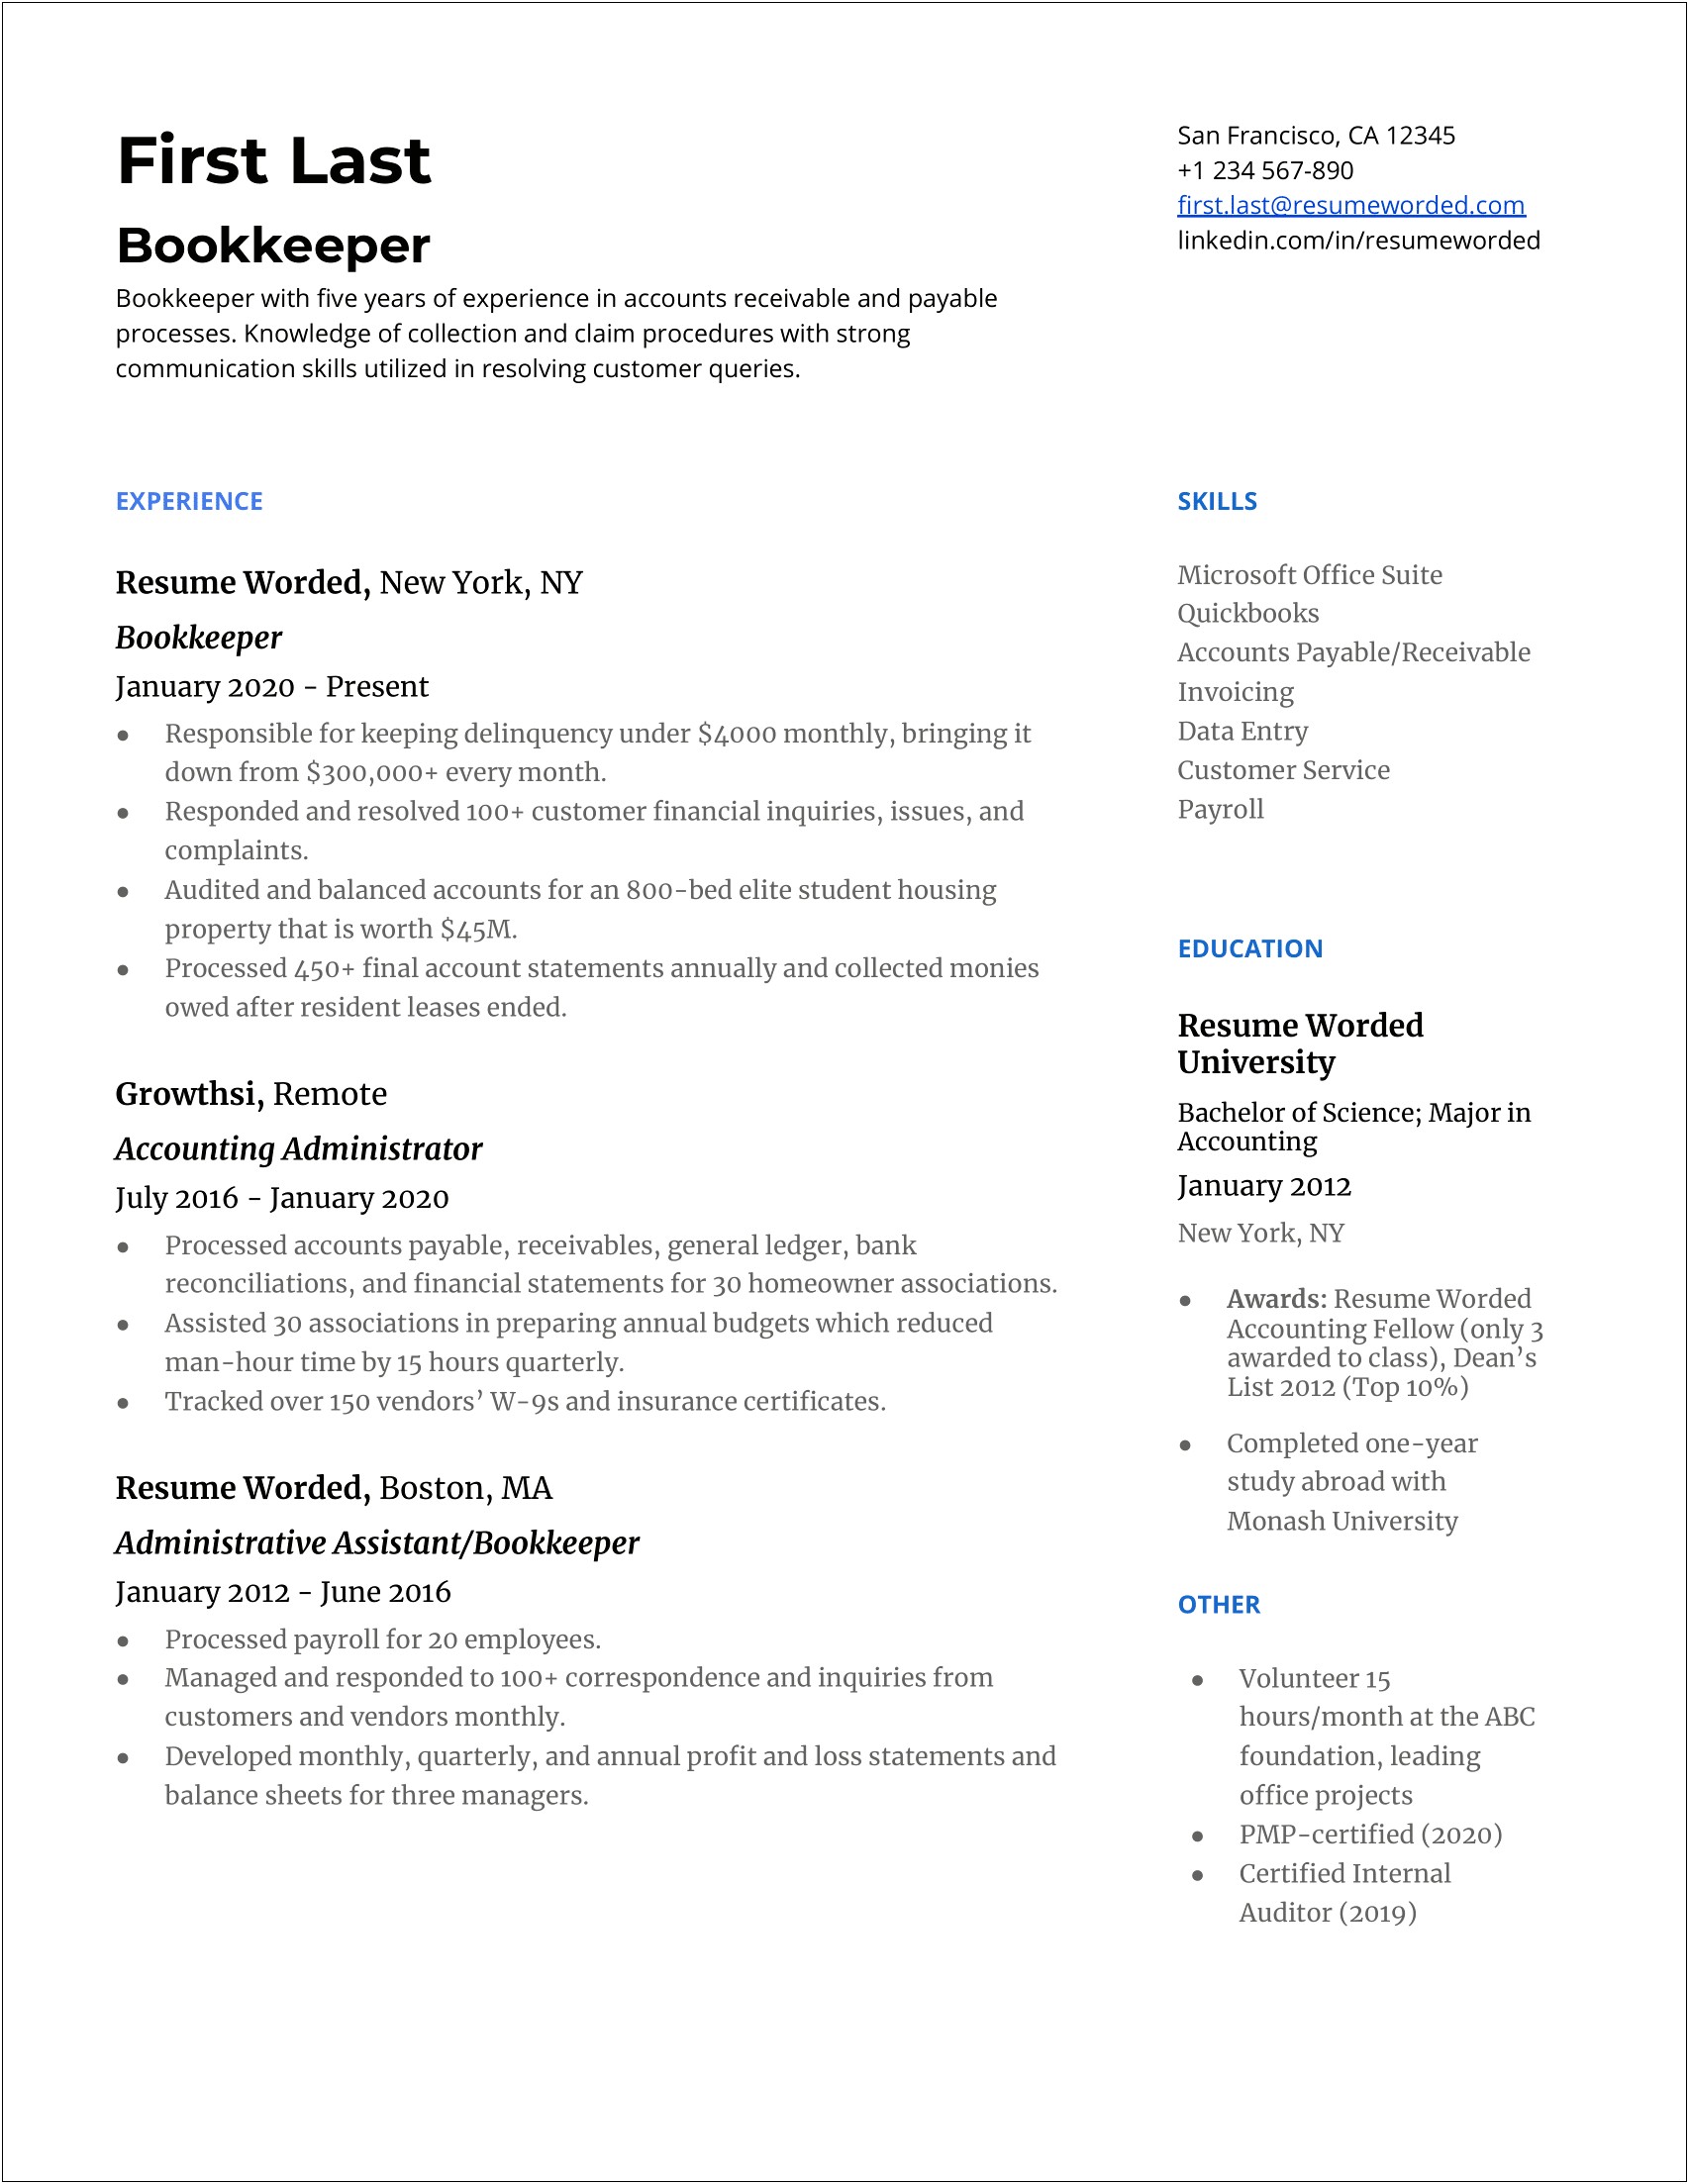 Resume Sample With The Words Midigating And Resolving